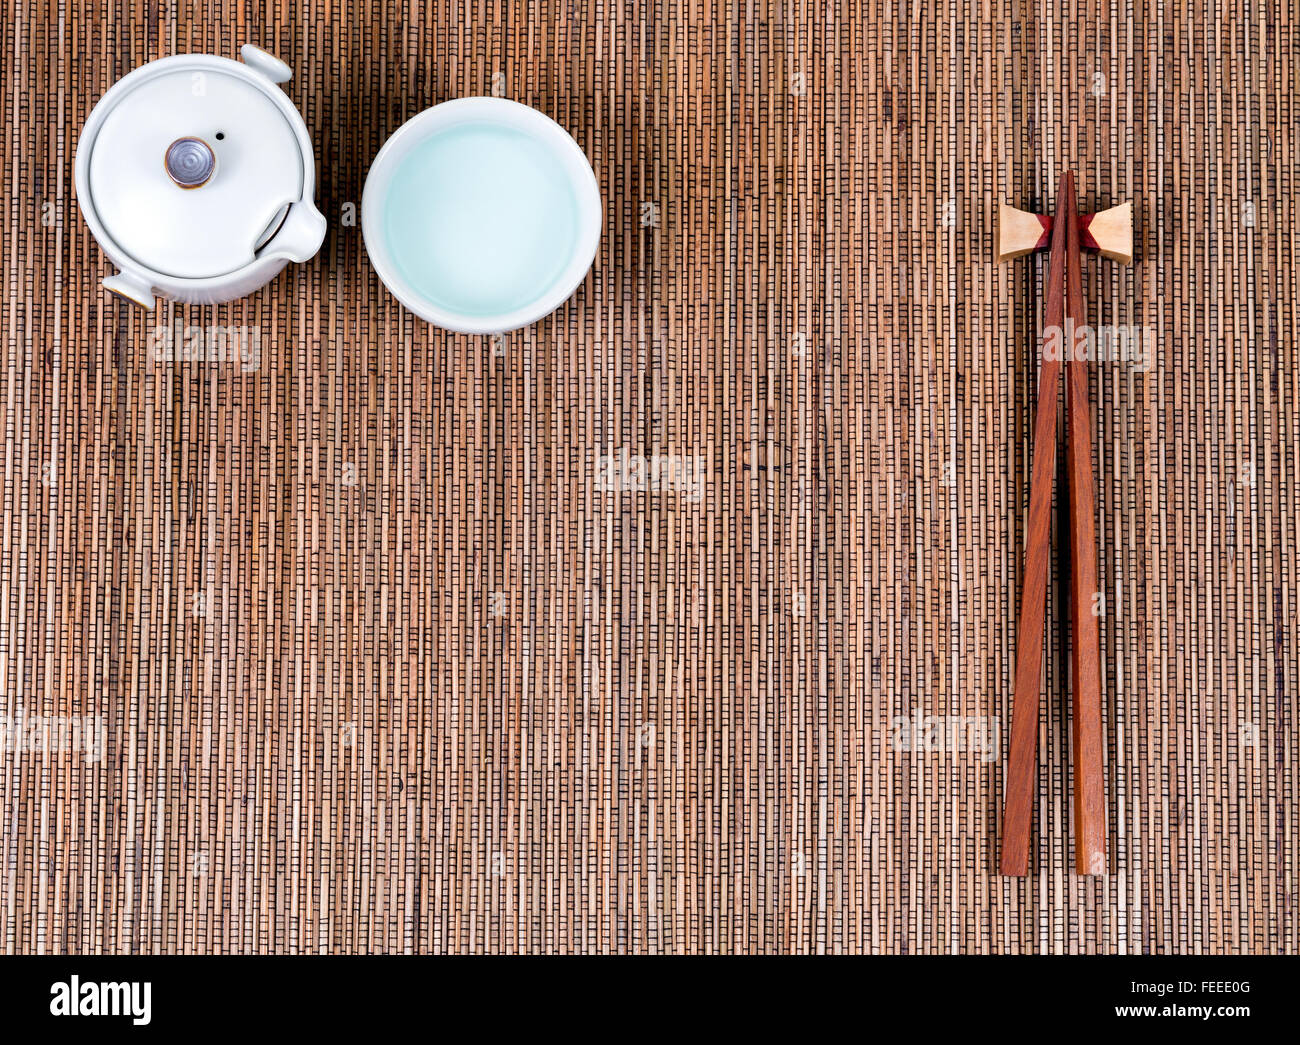 Overhead view of chopsticks, cup and tea server on bamboo mat. Stock Photo